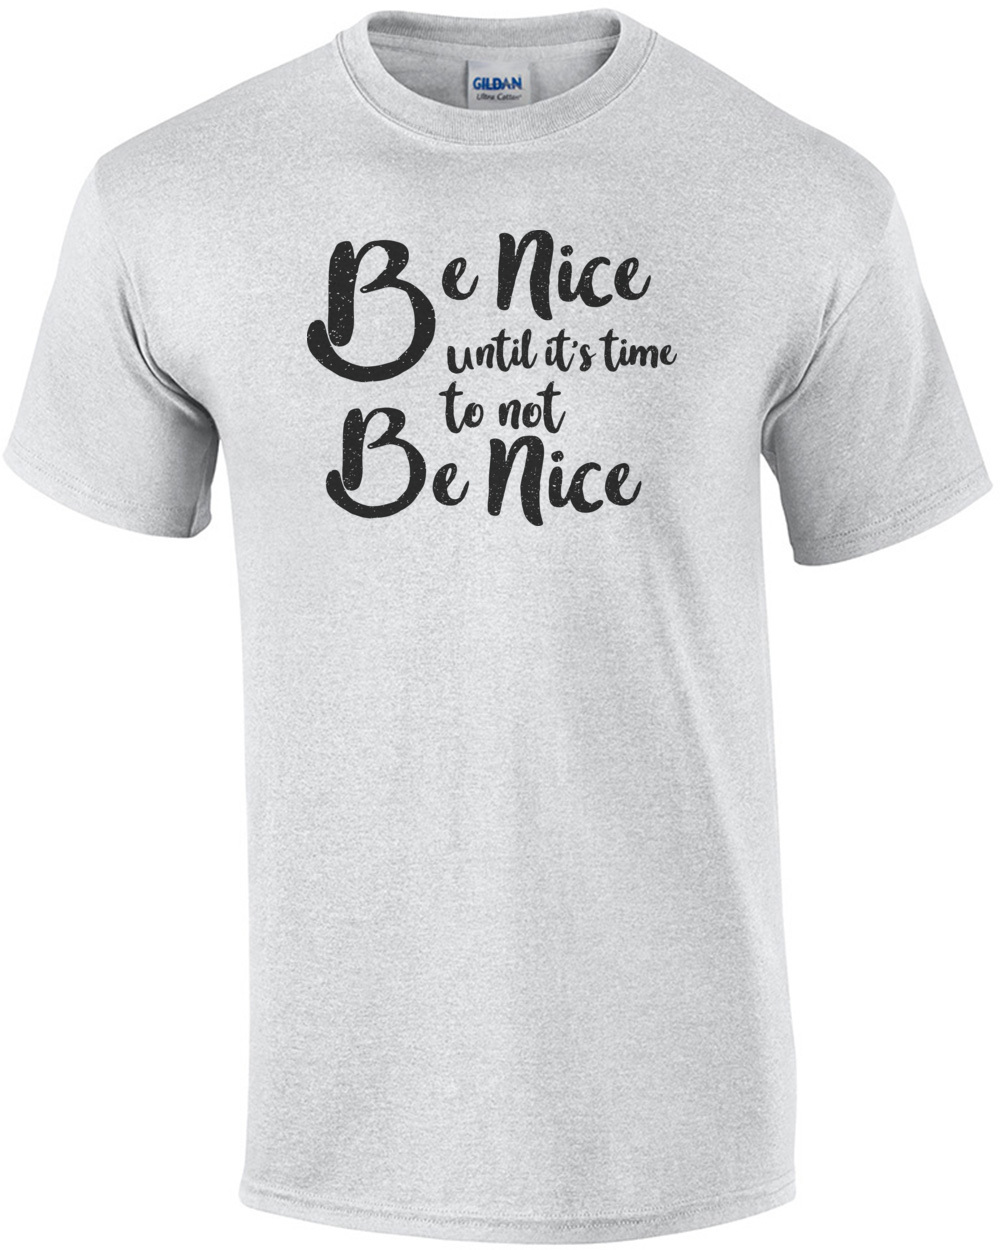 Be Nice Until Its Time to Not Be Nice T Shirt Vintage Movie Shirts Roadhouse Shirt 80s Shirts Funny Graphic Tees Movie Slogans Quotes Shirts